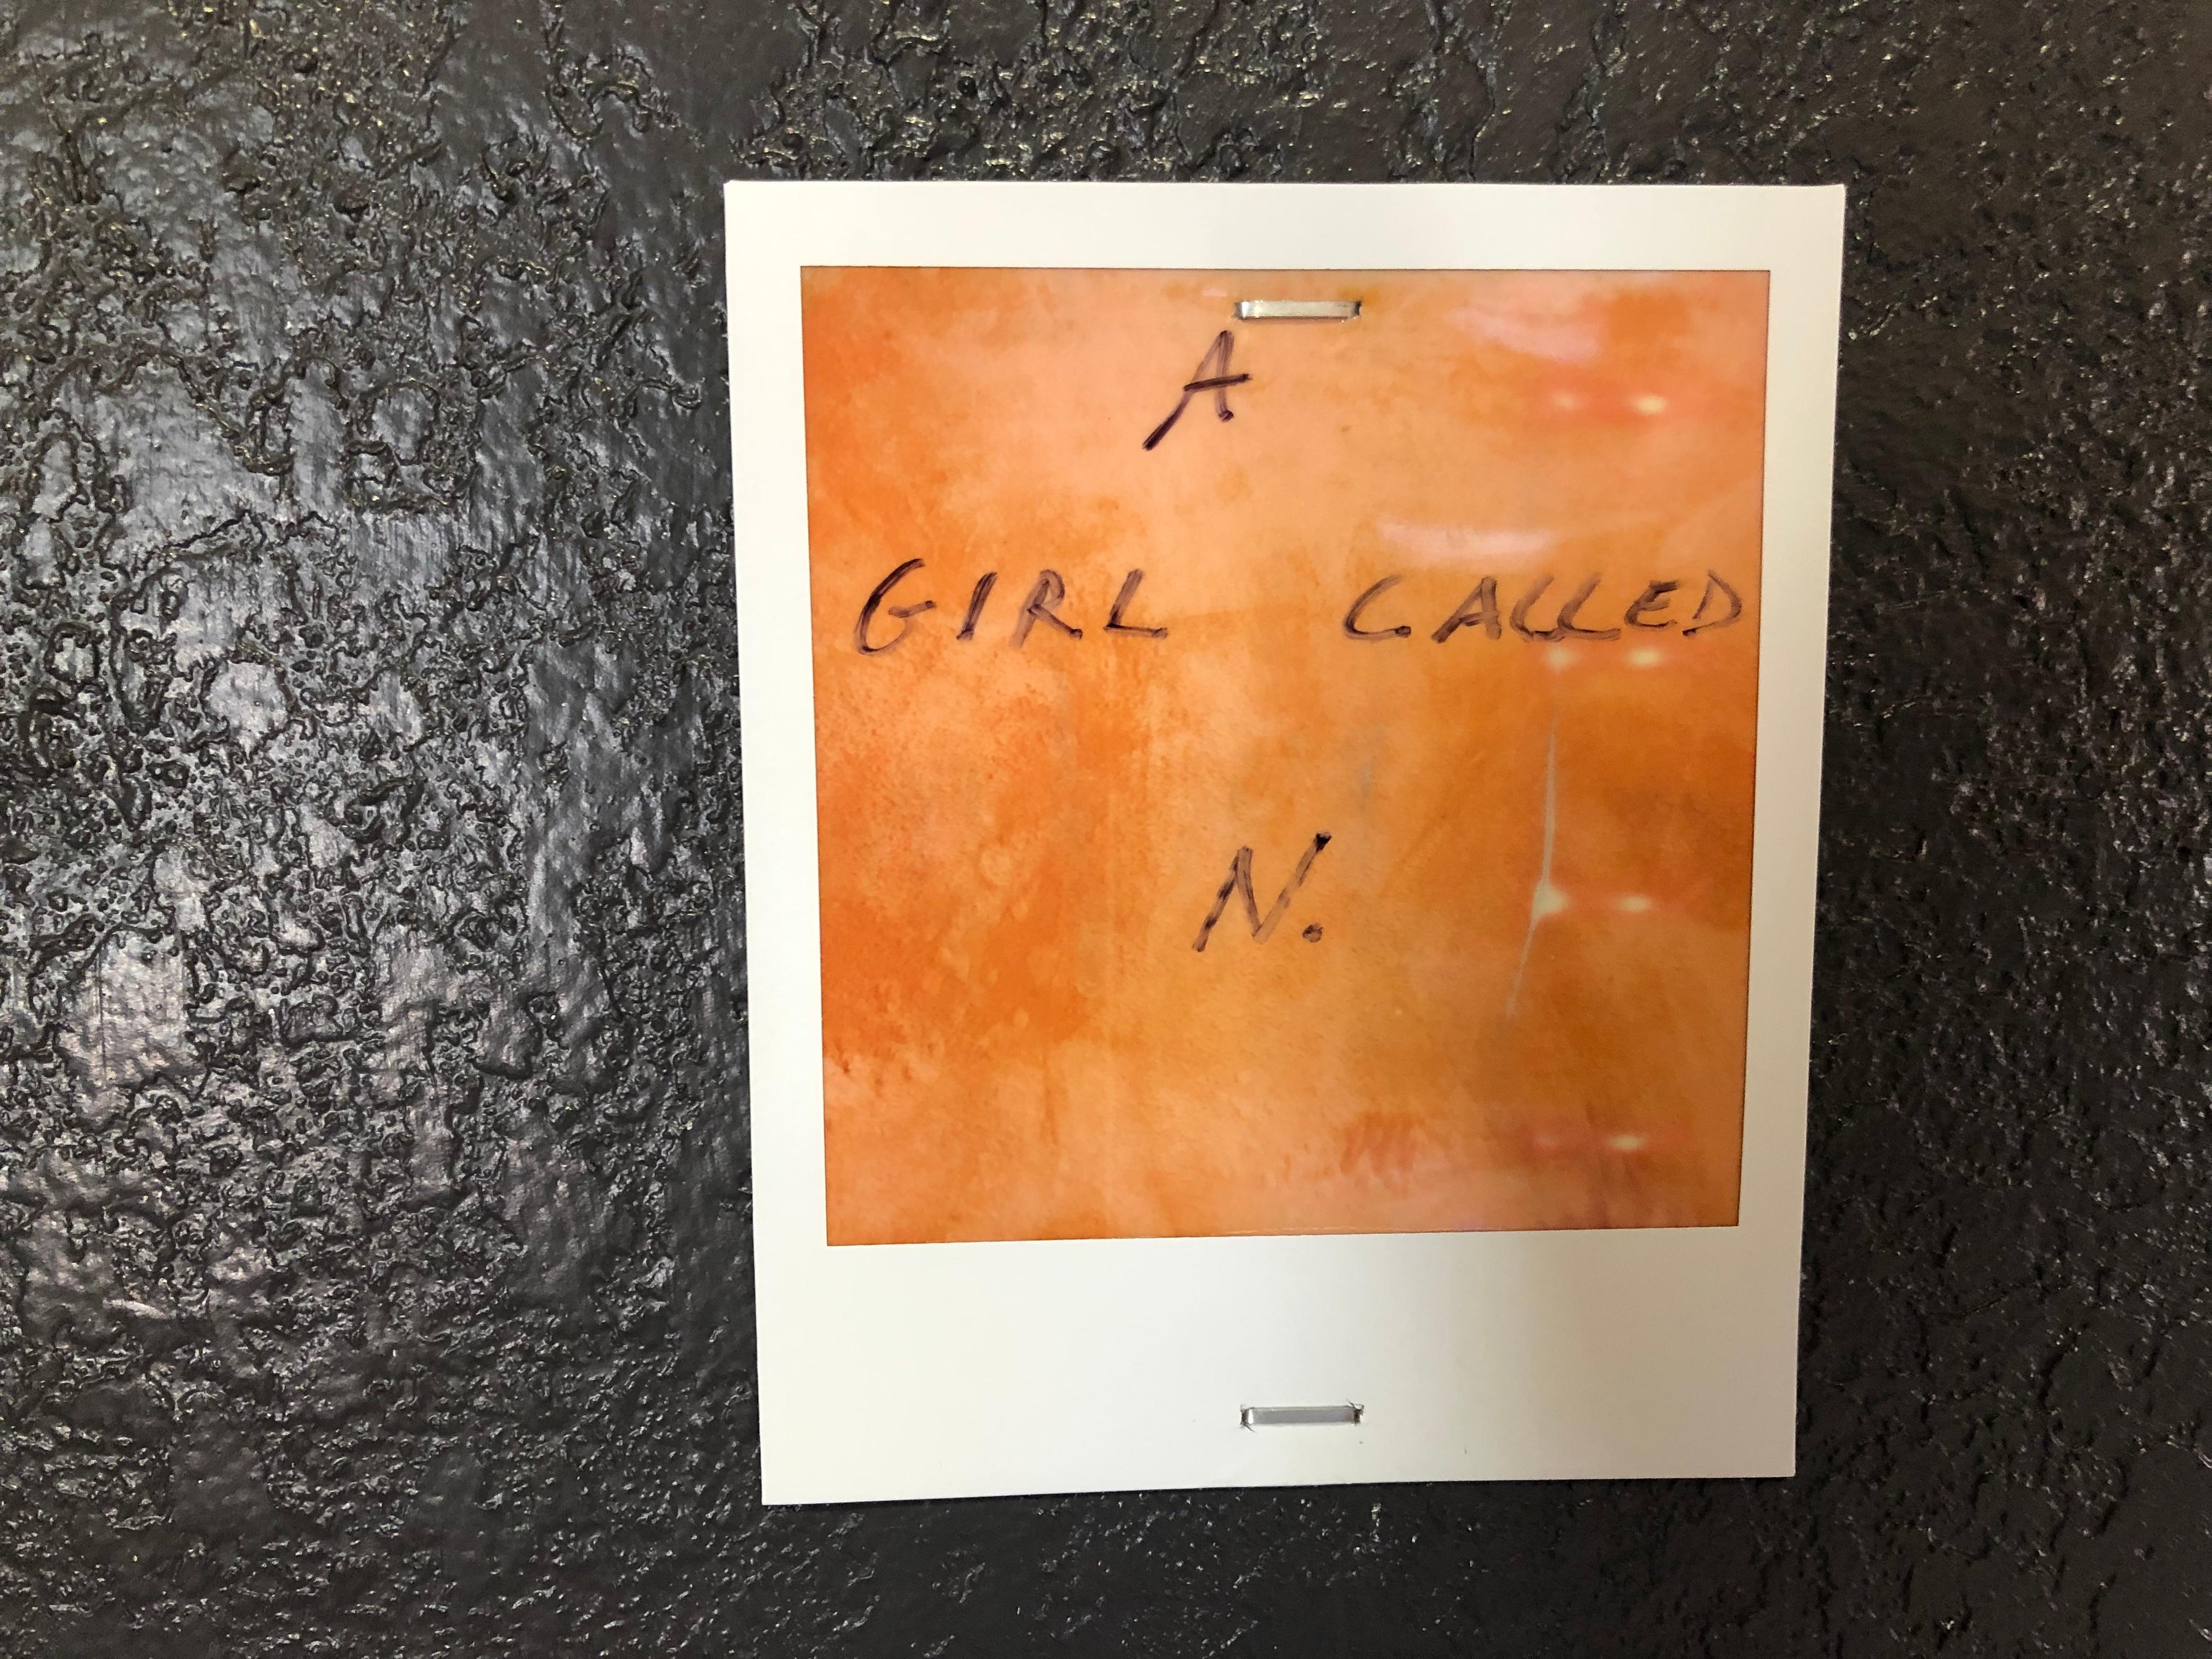 'Tinderbox' part of the series 'A girl called N.' 2019, 20x20cm, Edition 1/7 plus 2 Artist Proofs, digital C-Print based on a Polaroid, 
not mounted. Signed on the back and with certificate. Artist inventory PL2019-514.

Kirsten Thys van den